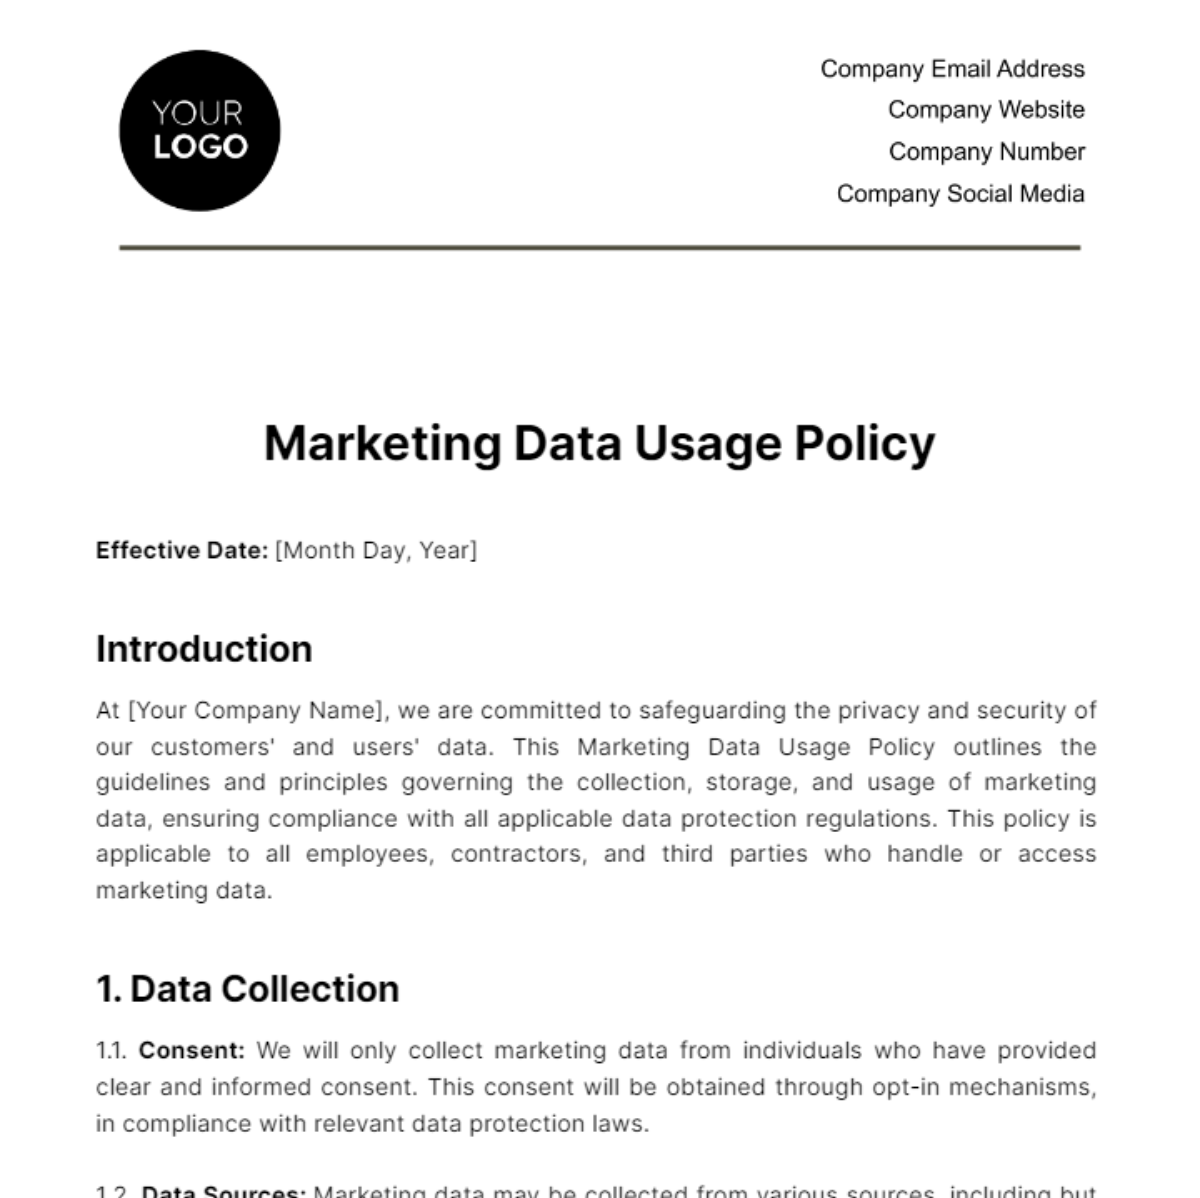 Marketing Data Usage Policy Template